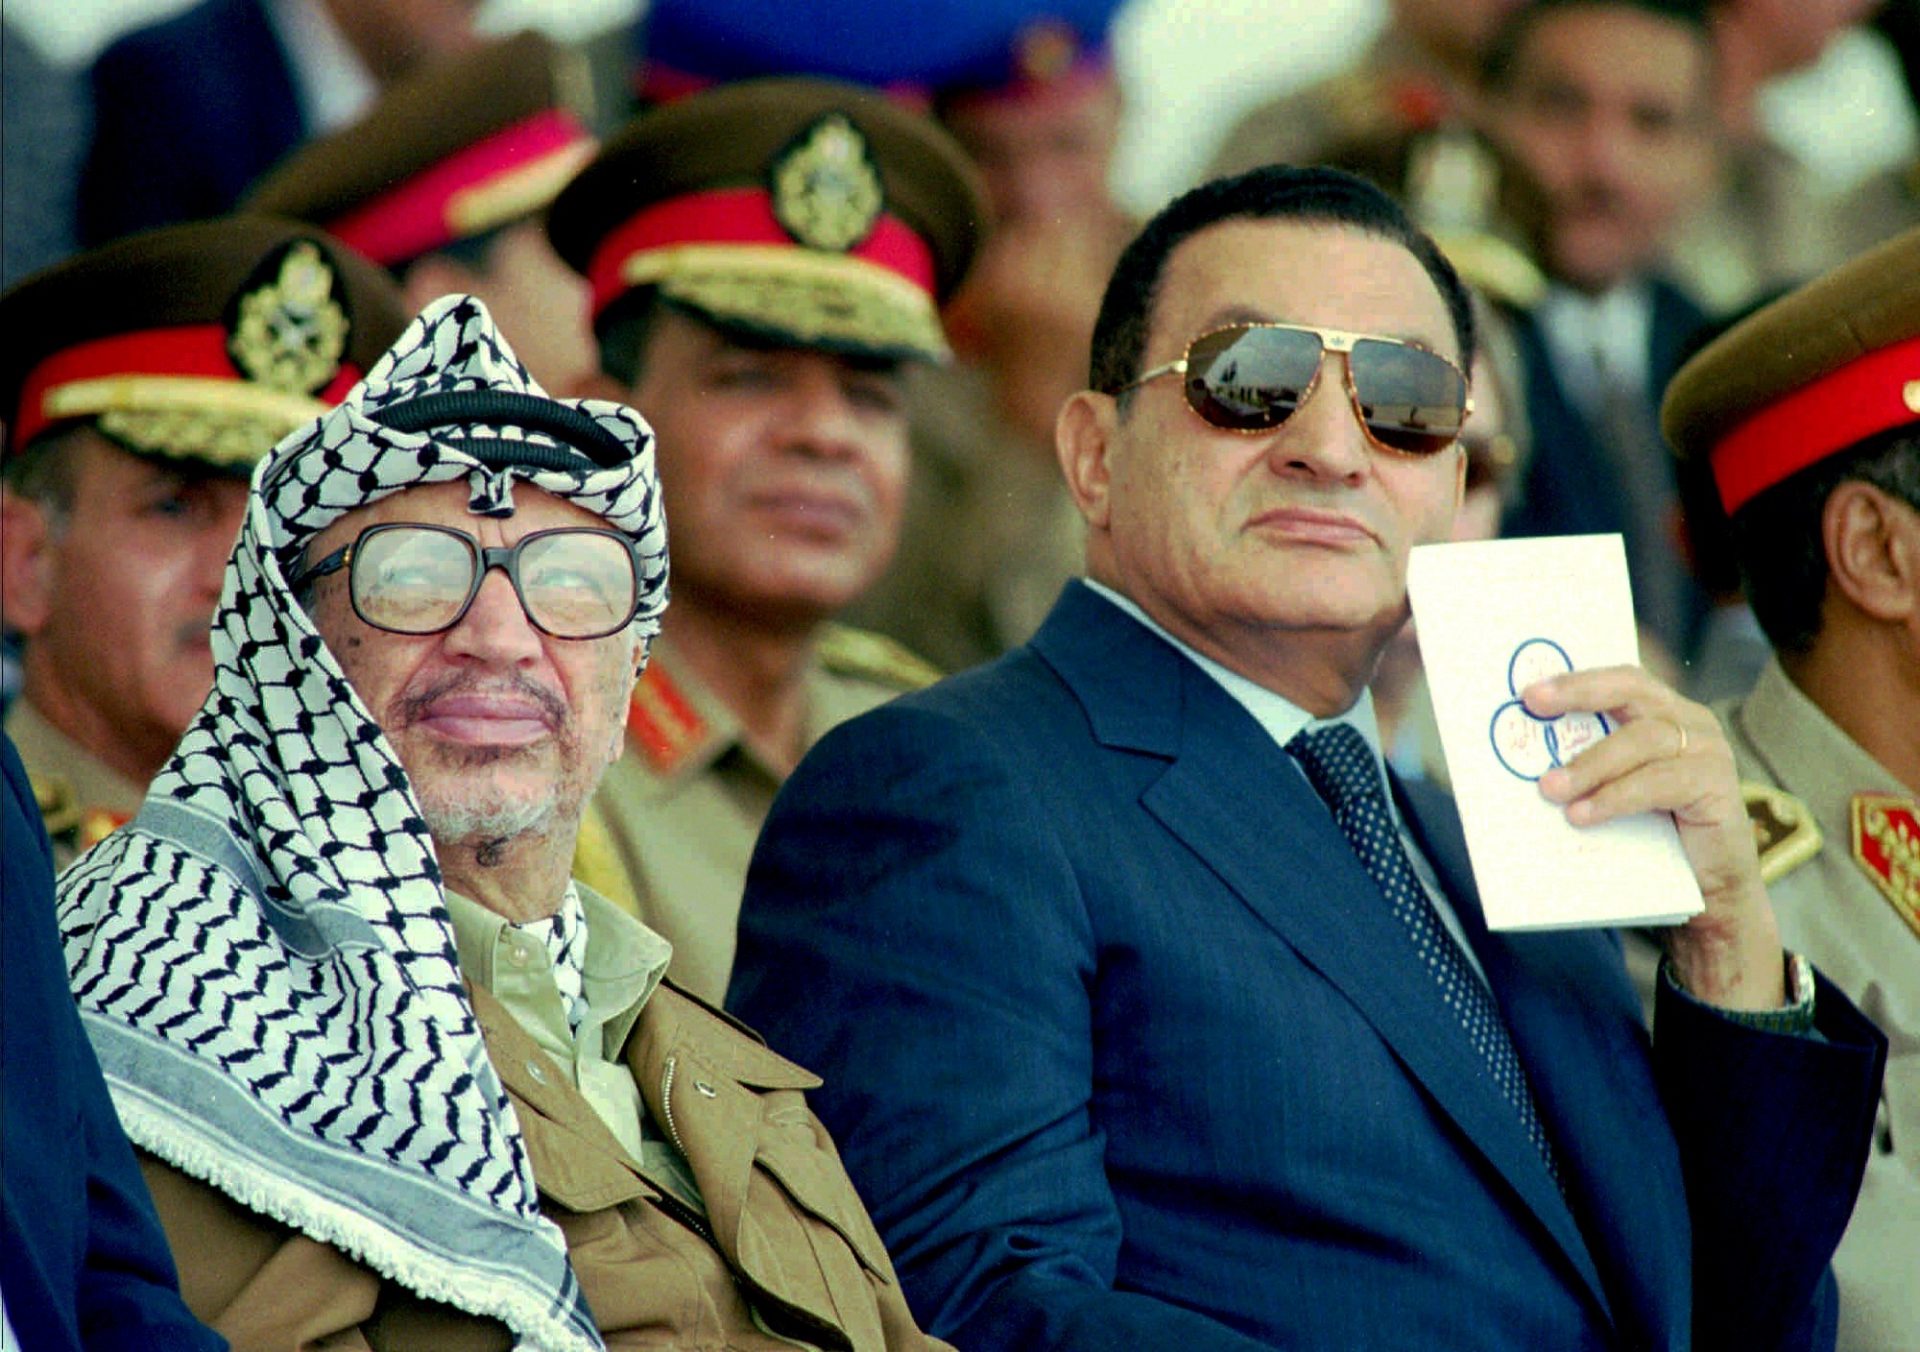 Palestinian Leader Yasser Arafat, left, and Egyptian President Hosni Mubarak watch an Egyptian airforce air show at a base near the town of Bilbeis, 31 miles north of Cairo, Sunday July 14,1996. Arafat is in Egypt for talks with the Egyptian President.